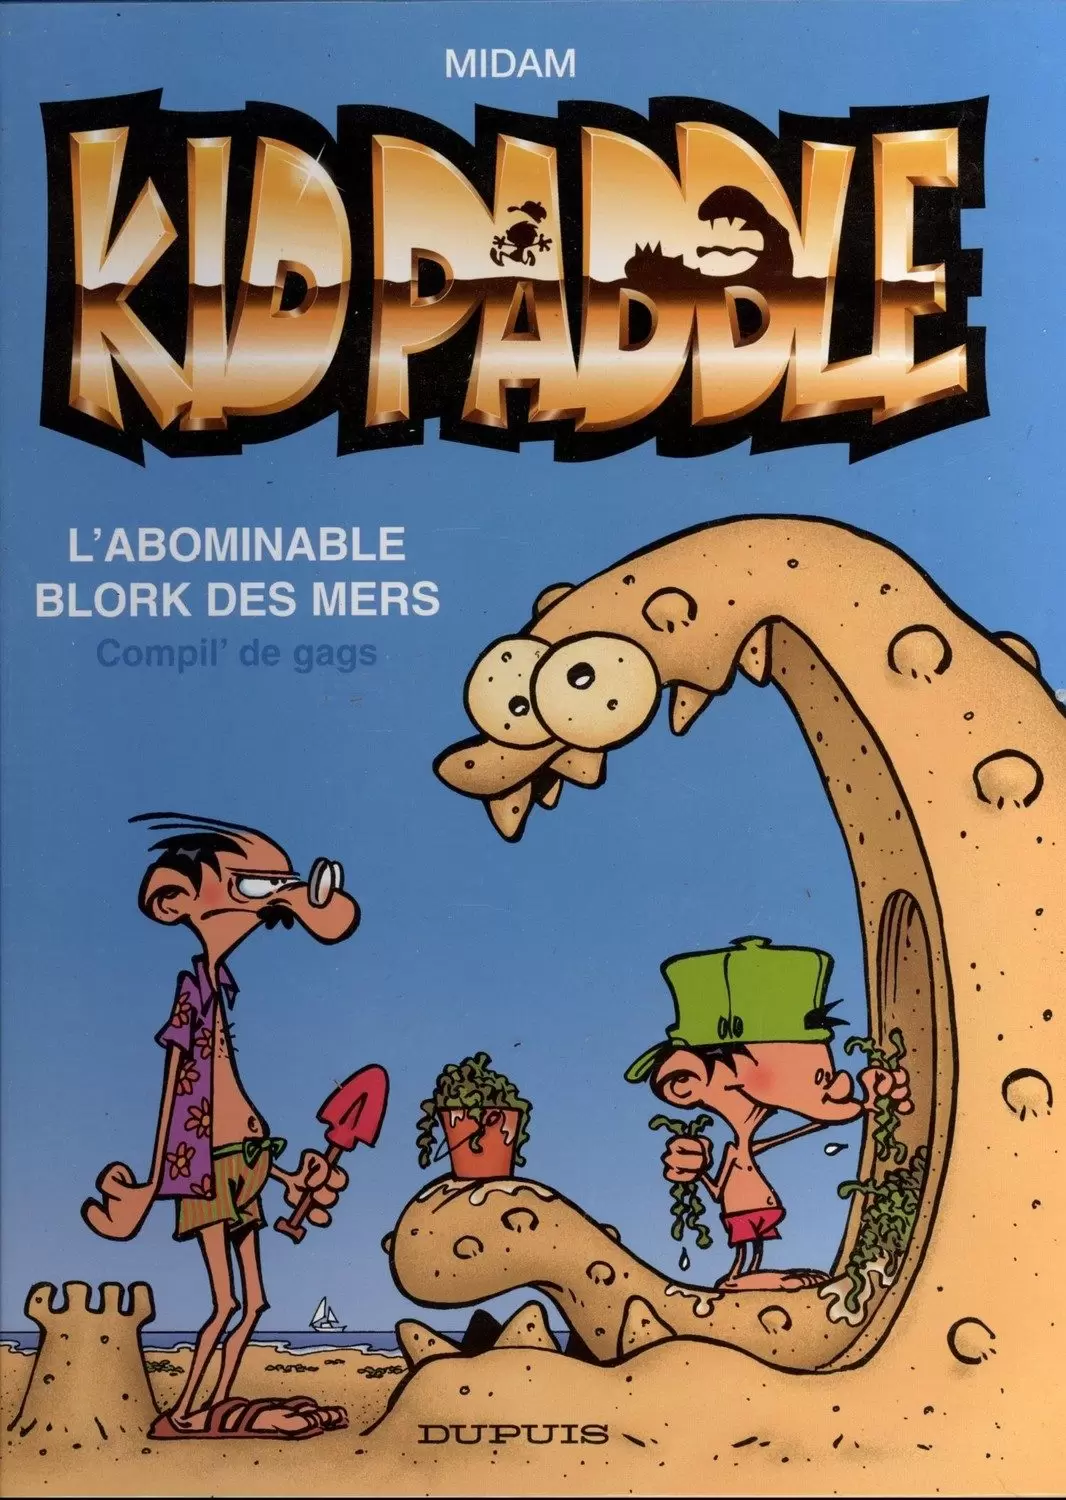 Kid Paddle - L\'Abominable Blork des mers - Compil\' de gags